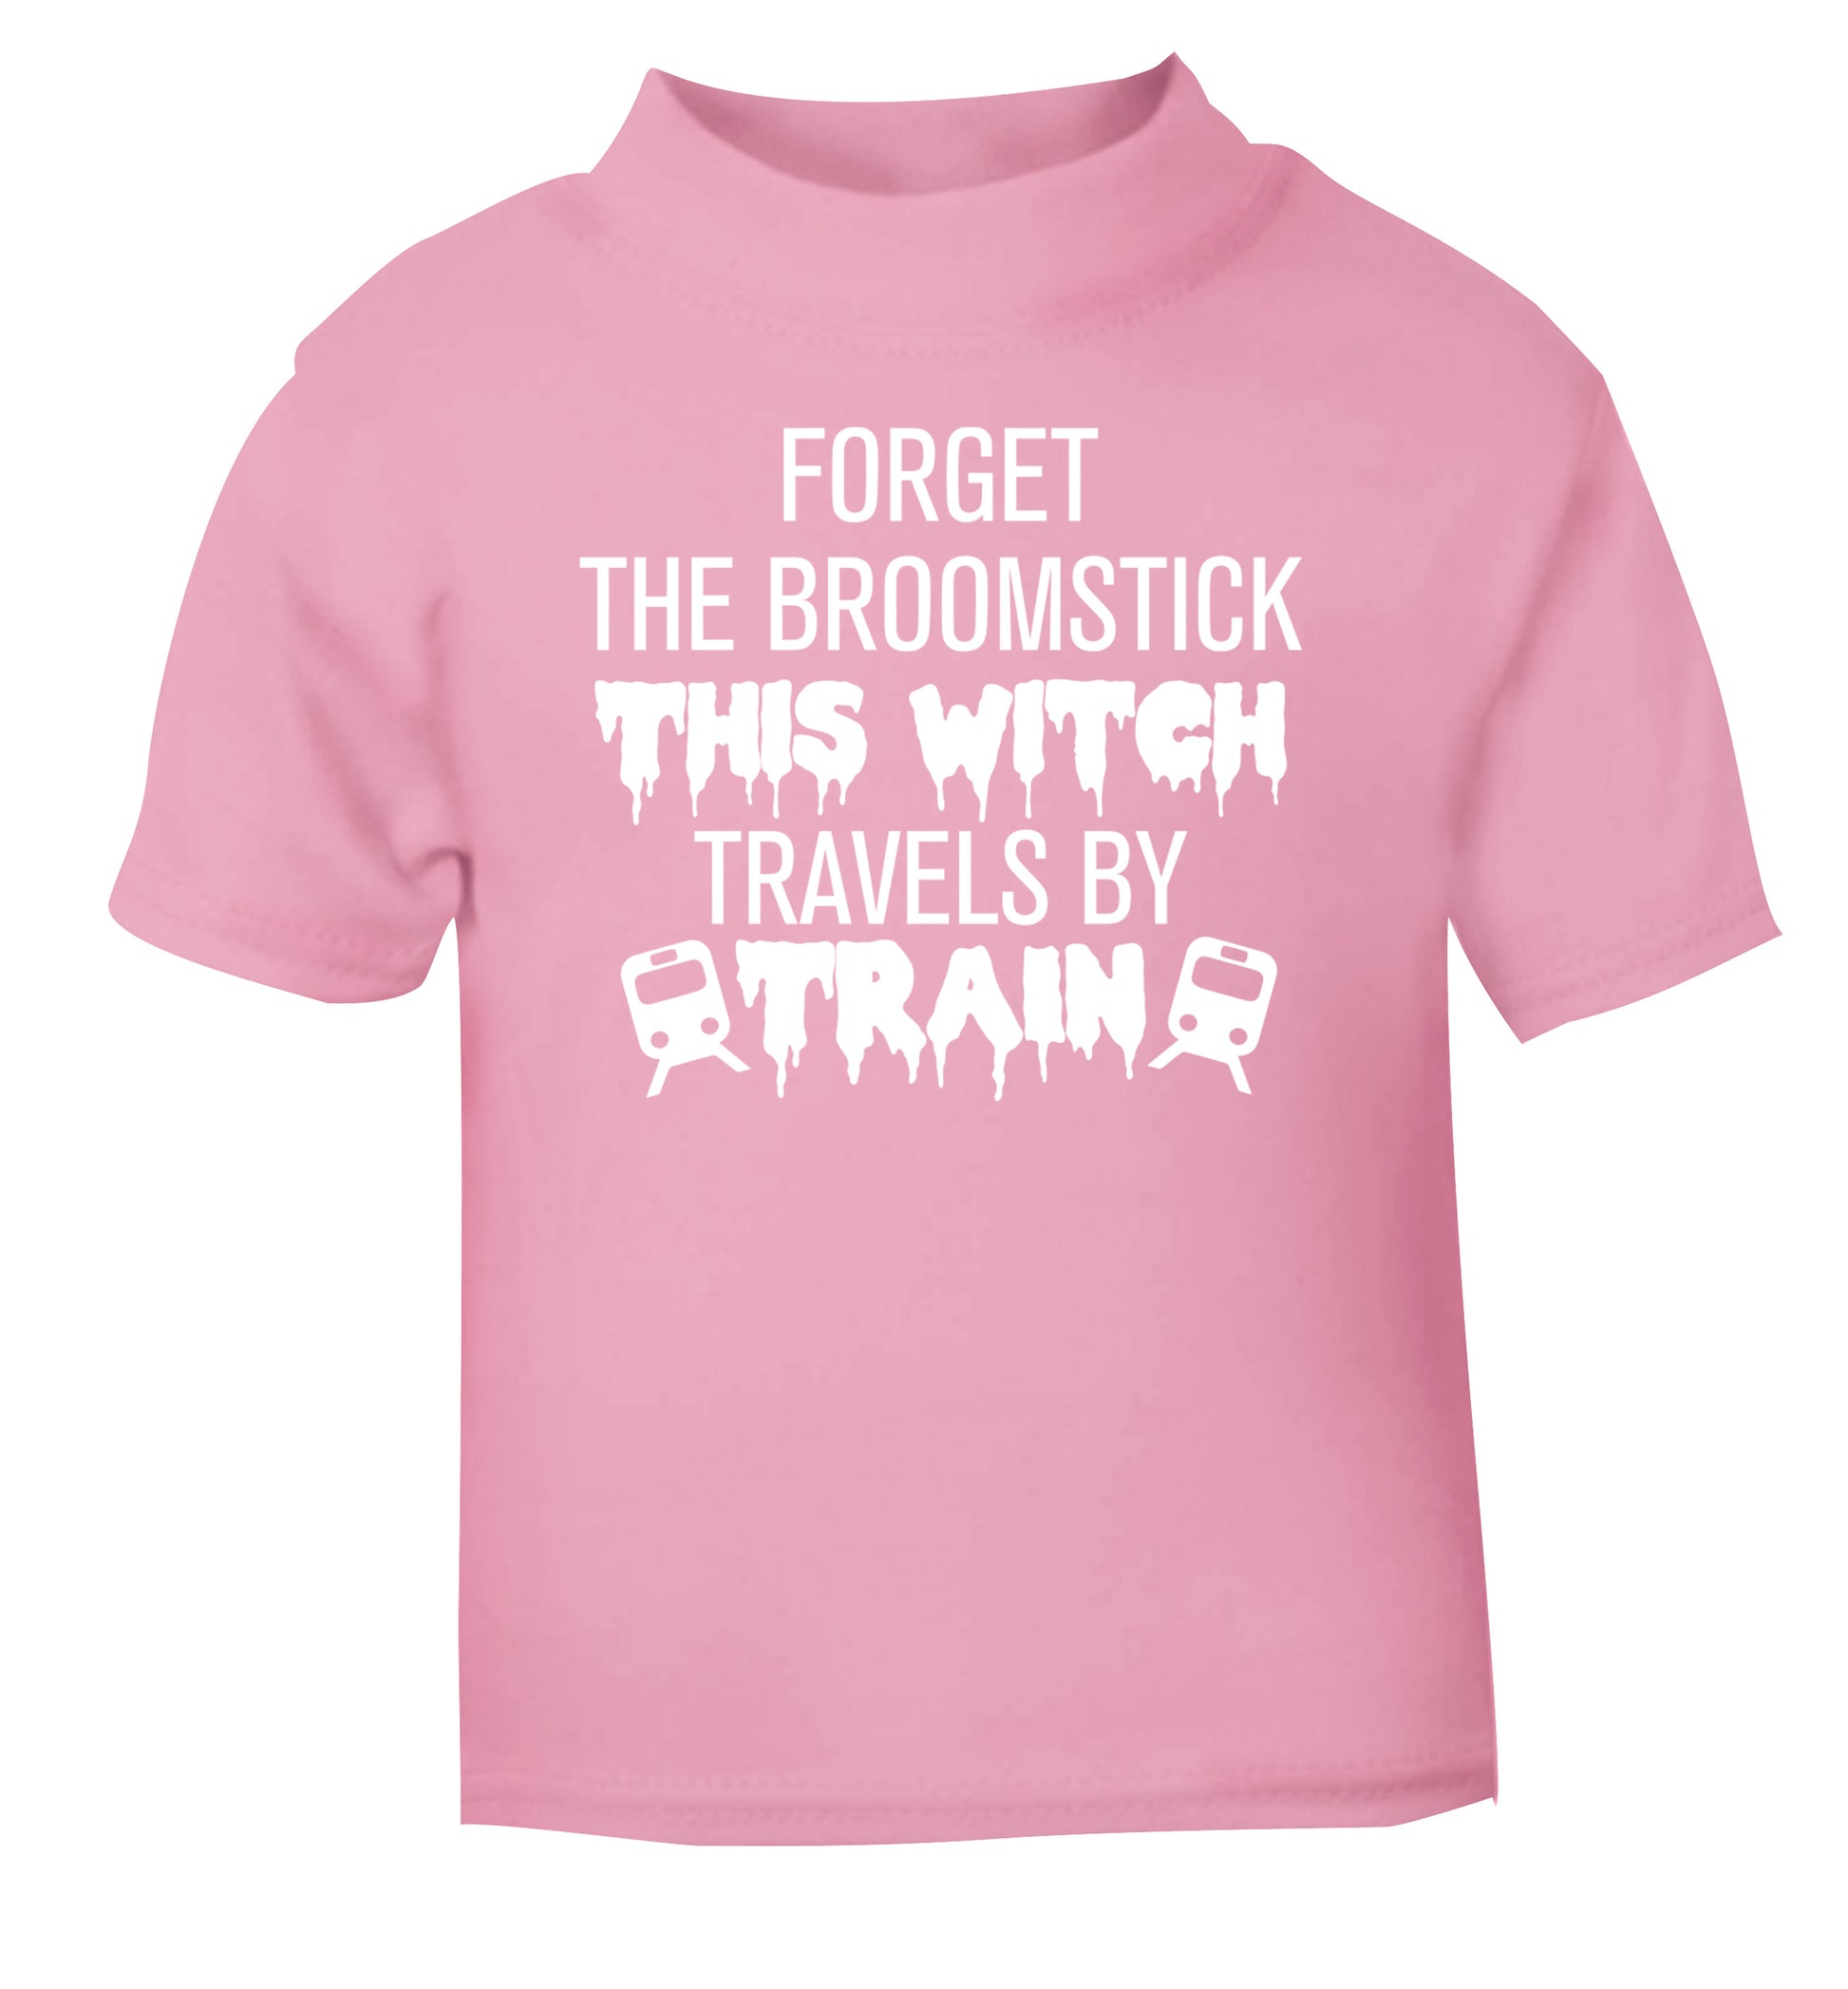 Forget the broomstick this witch travels by train light pink Baby Toddler Tshirt 2 Years